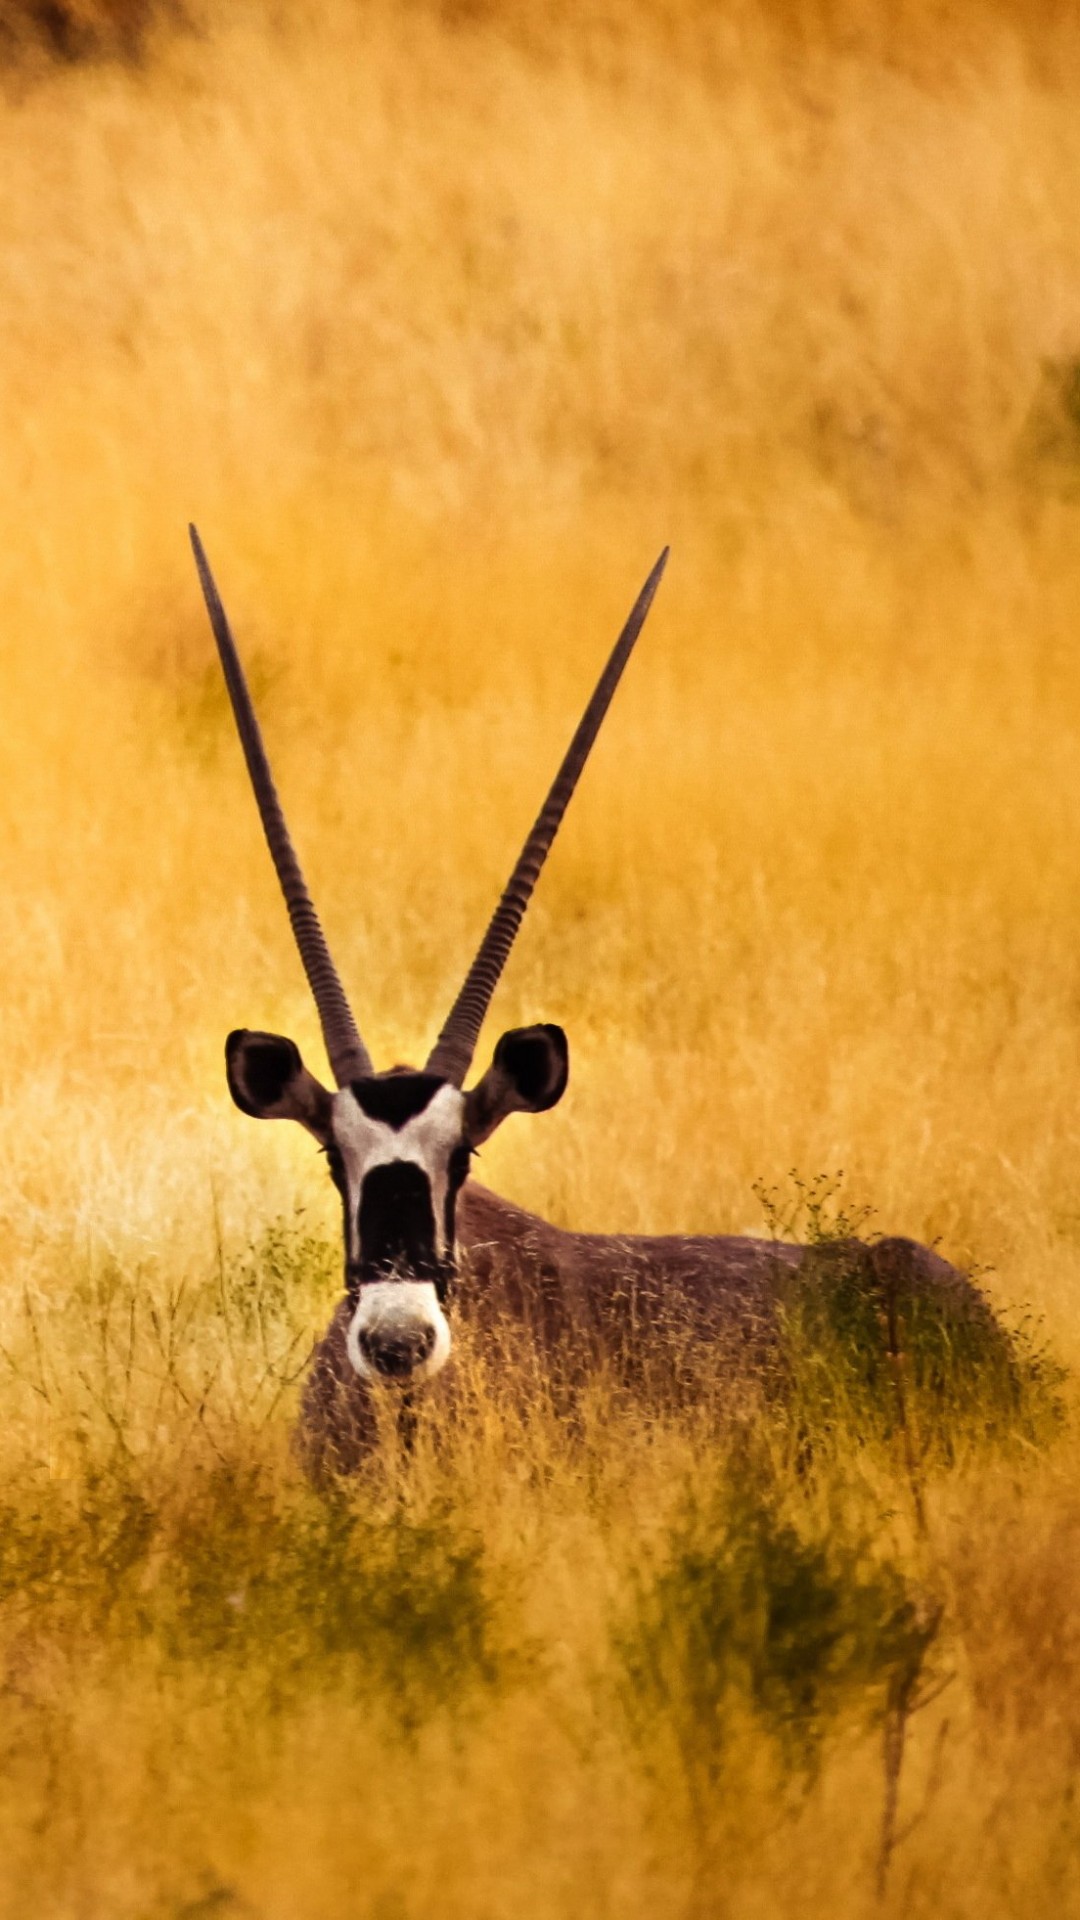 Antelope In The Savanna Wallpaper for SONY Xperia Z1